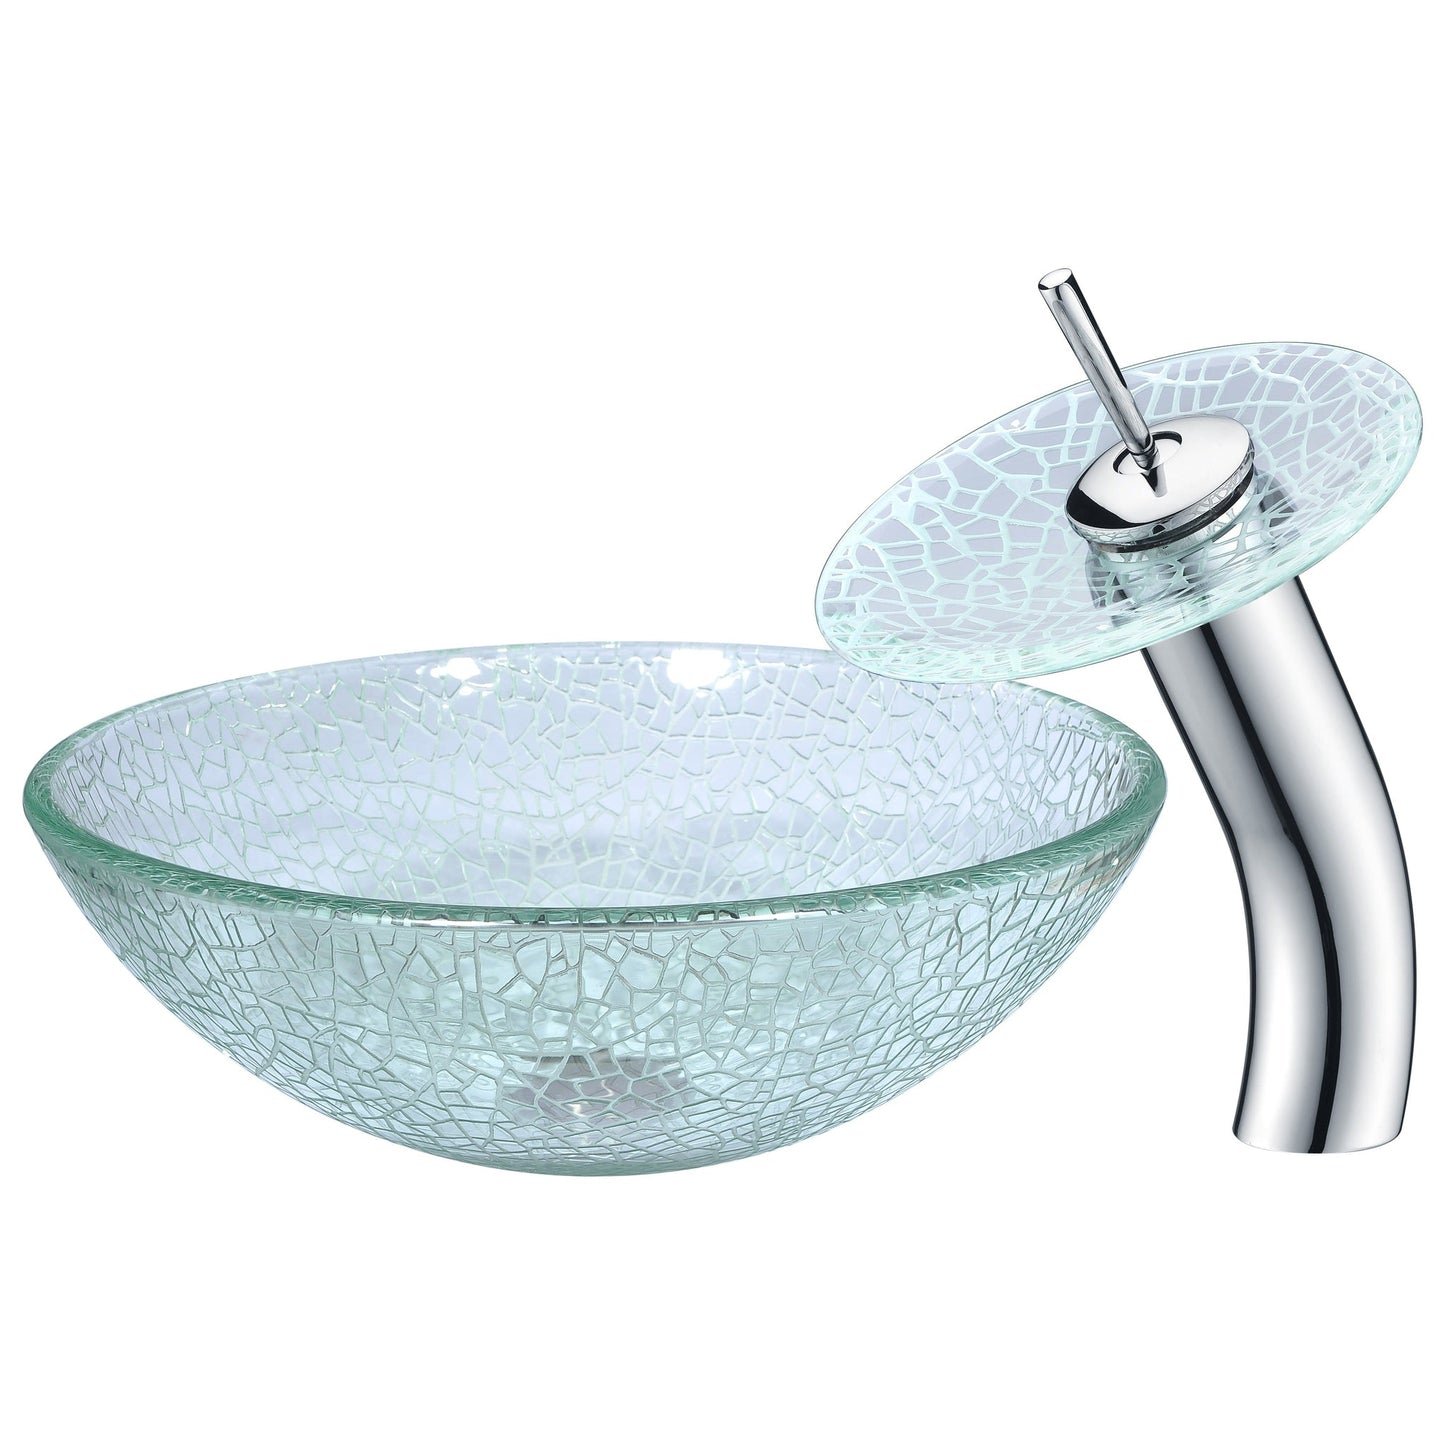 ANZZI Choir Series 17" x 17" Round Crystal Clear Deco-Glass Vessel Sink With Polished Chrome Pop-Up Drain and Waterfall Faucet